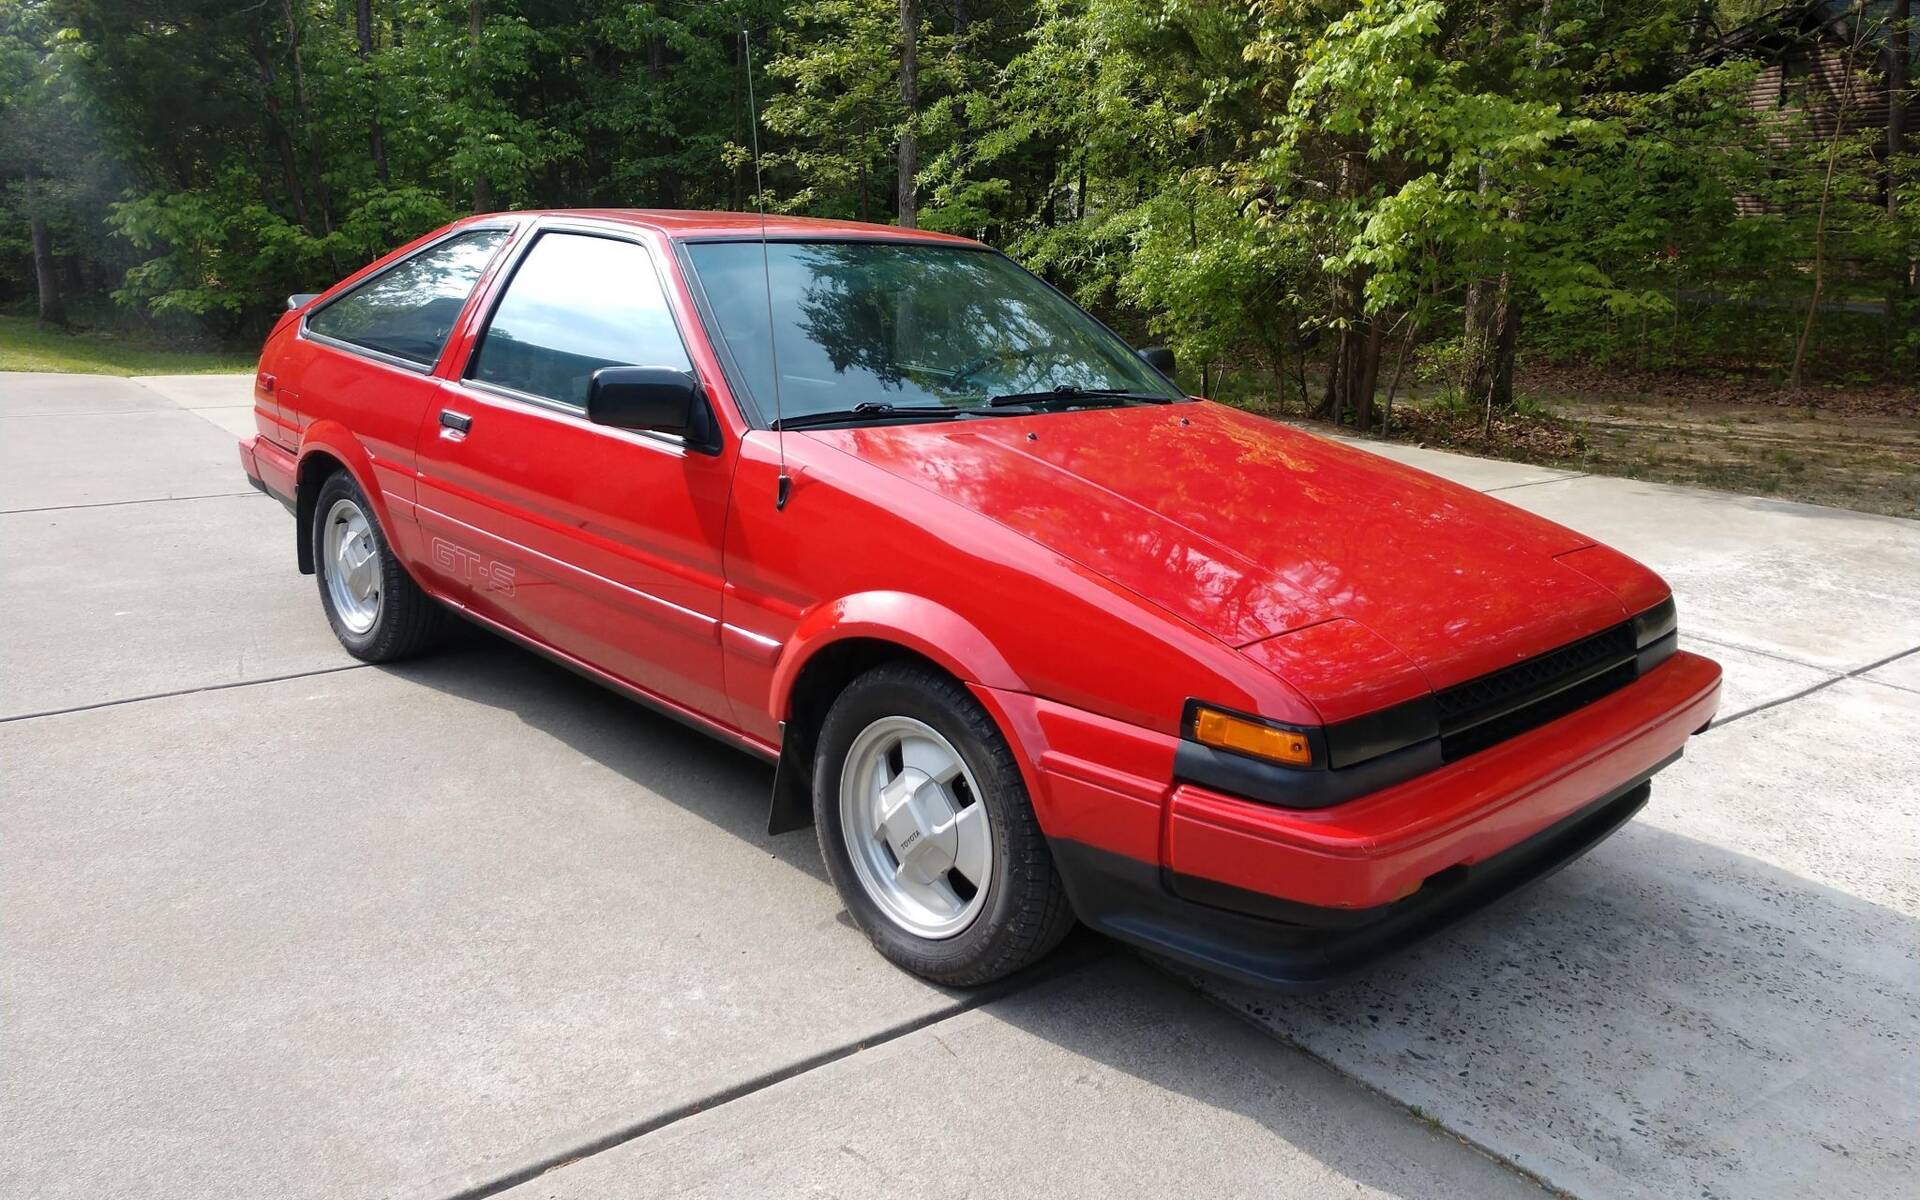 This 1985 Toyota Corolla GT-S Sold for 4 Times its Original Price